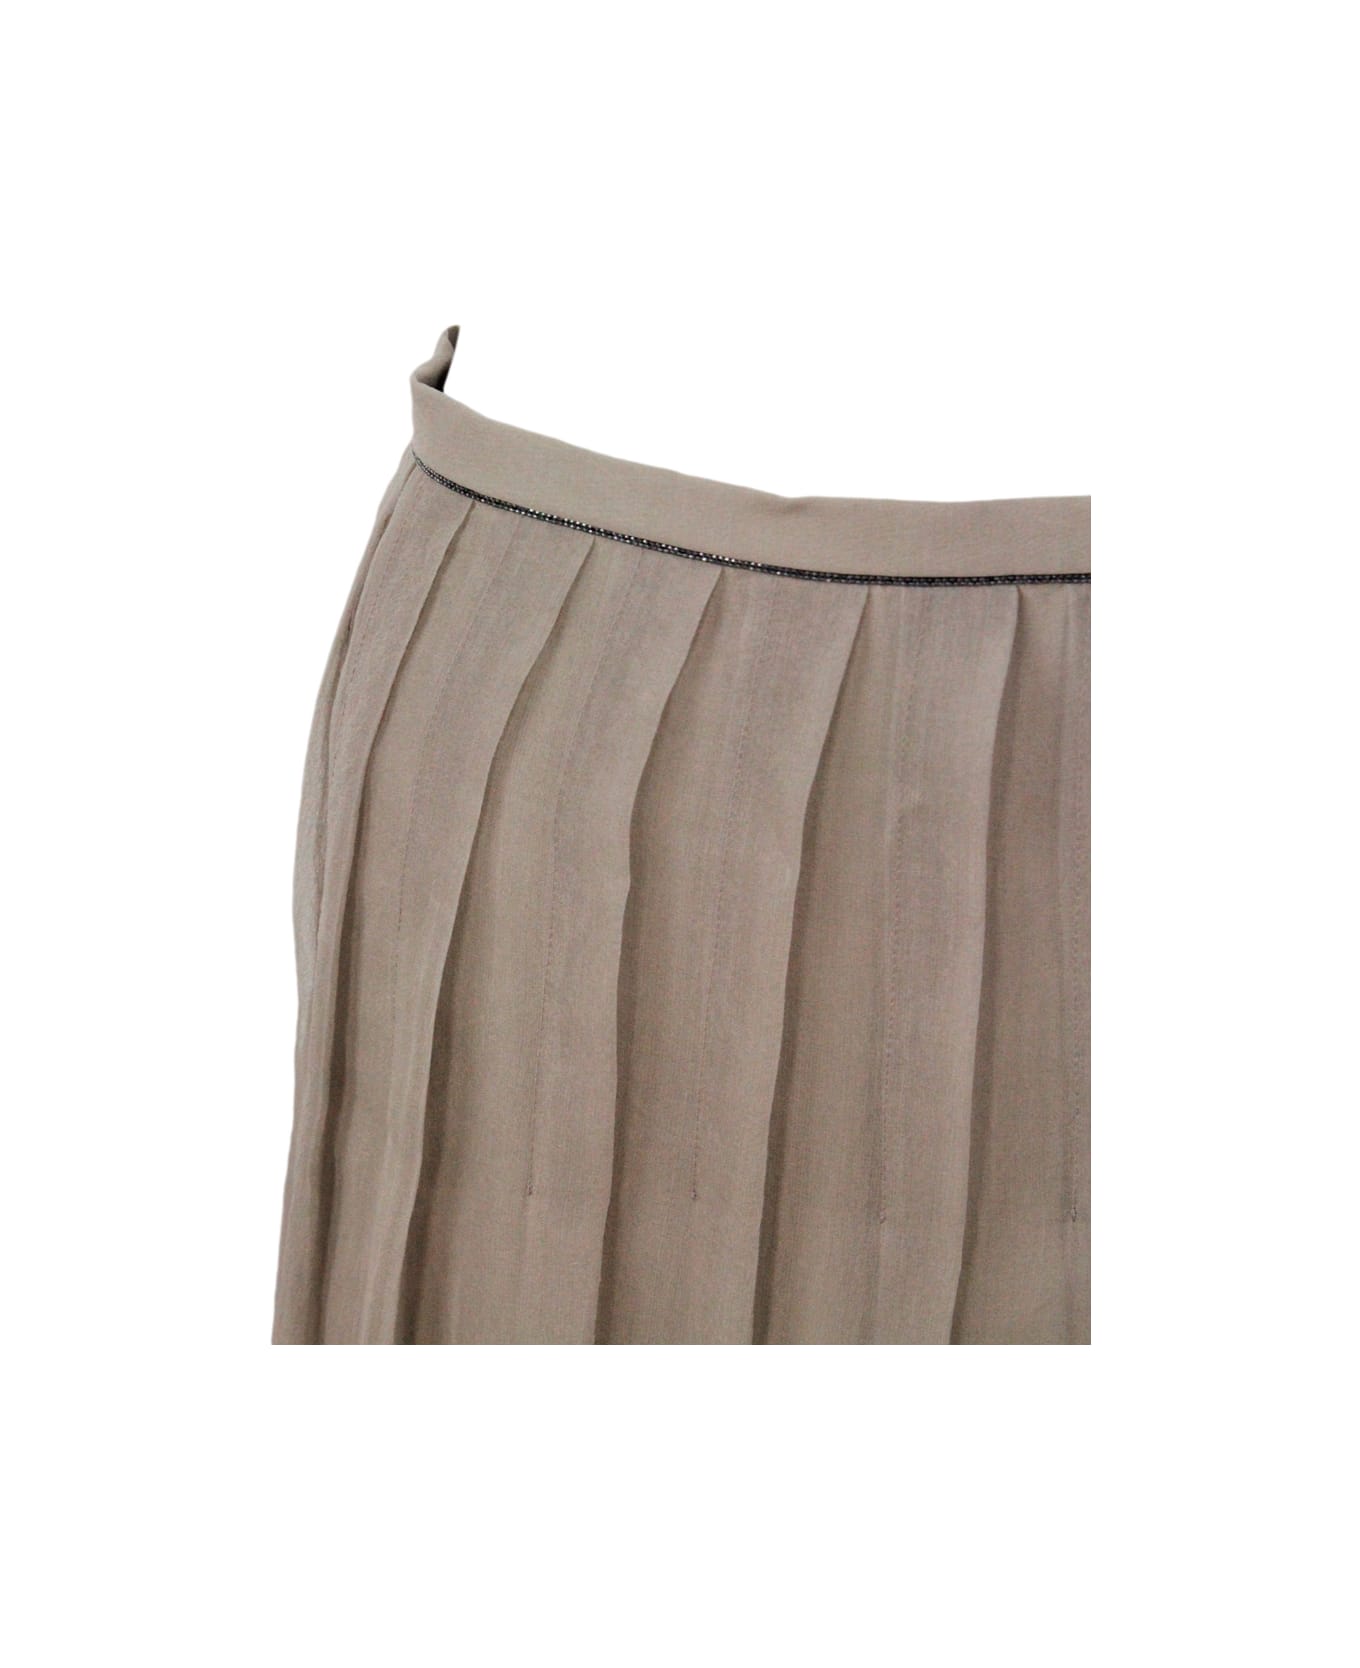 Brunello Cucinelli Long Pleated Skirt Made Of Fine Silk With Underlying Lining. Side Zip Closure And Shiny Jewel On The Strap - Nut